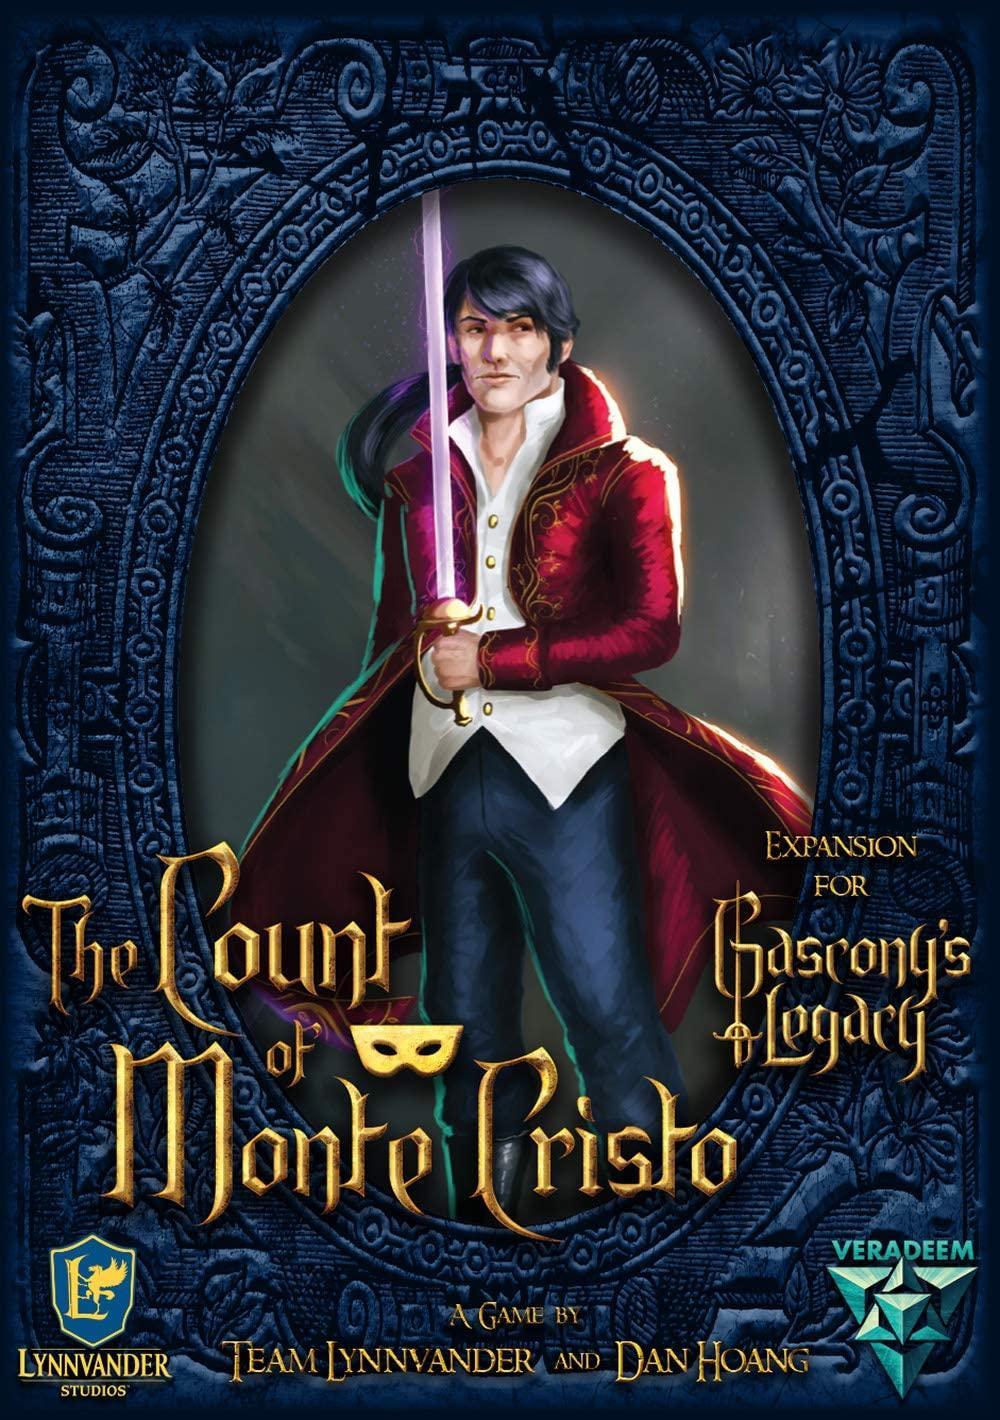 Gascony's Legacy: The Count of Monte Cristo - The Card Vault